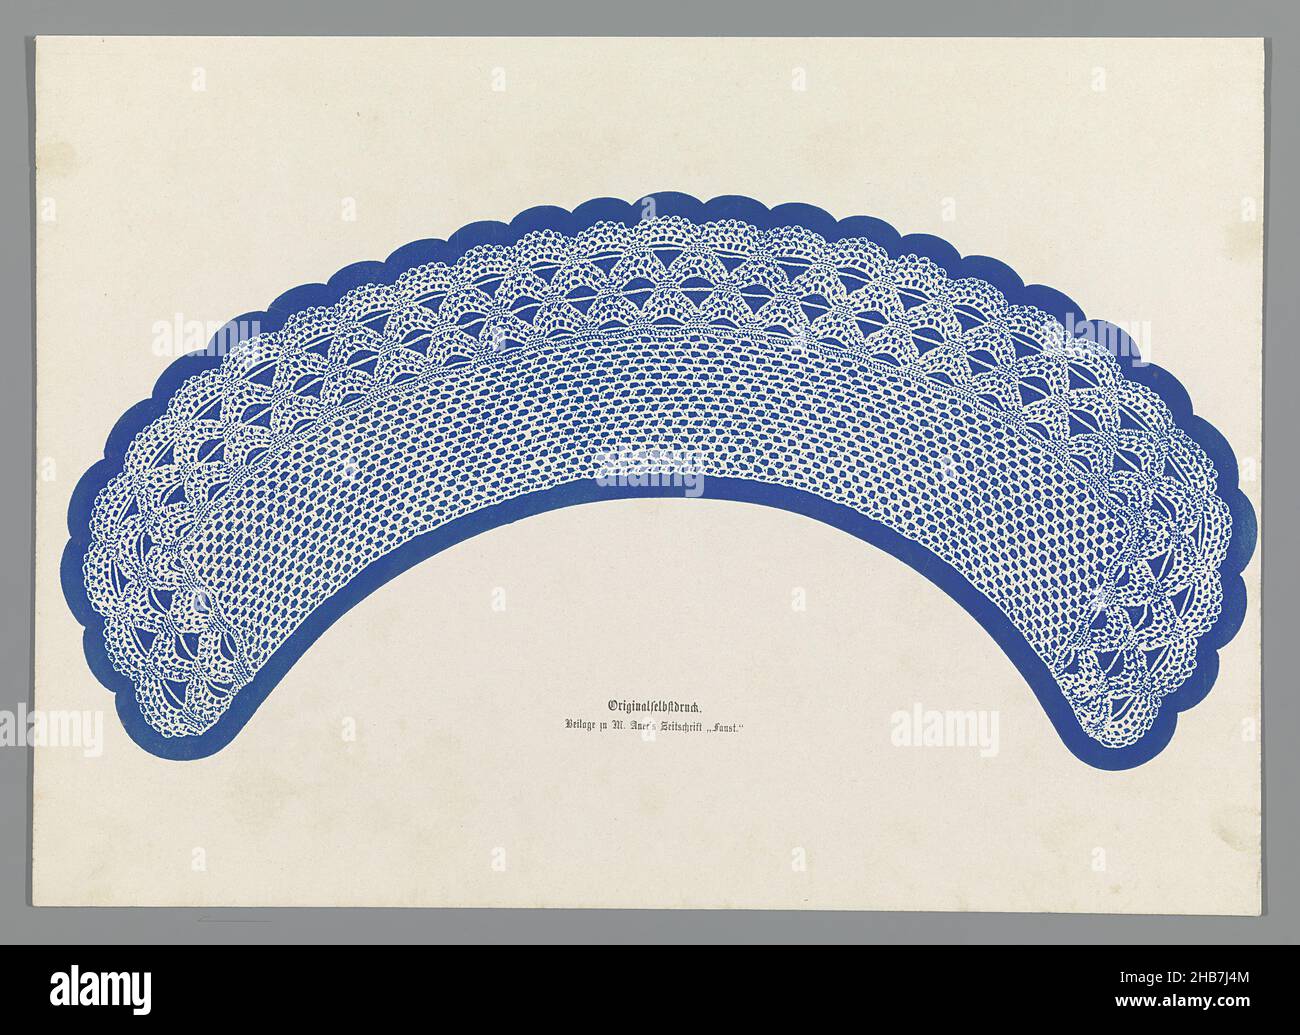 Lace pattern, Sheet from series of 12 Naturselbstdrucke Auer., maker: Alois Auer, (mentioned on object), Vienna, 1855, paper, height 245 mm × width 344 mm Stock Photo